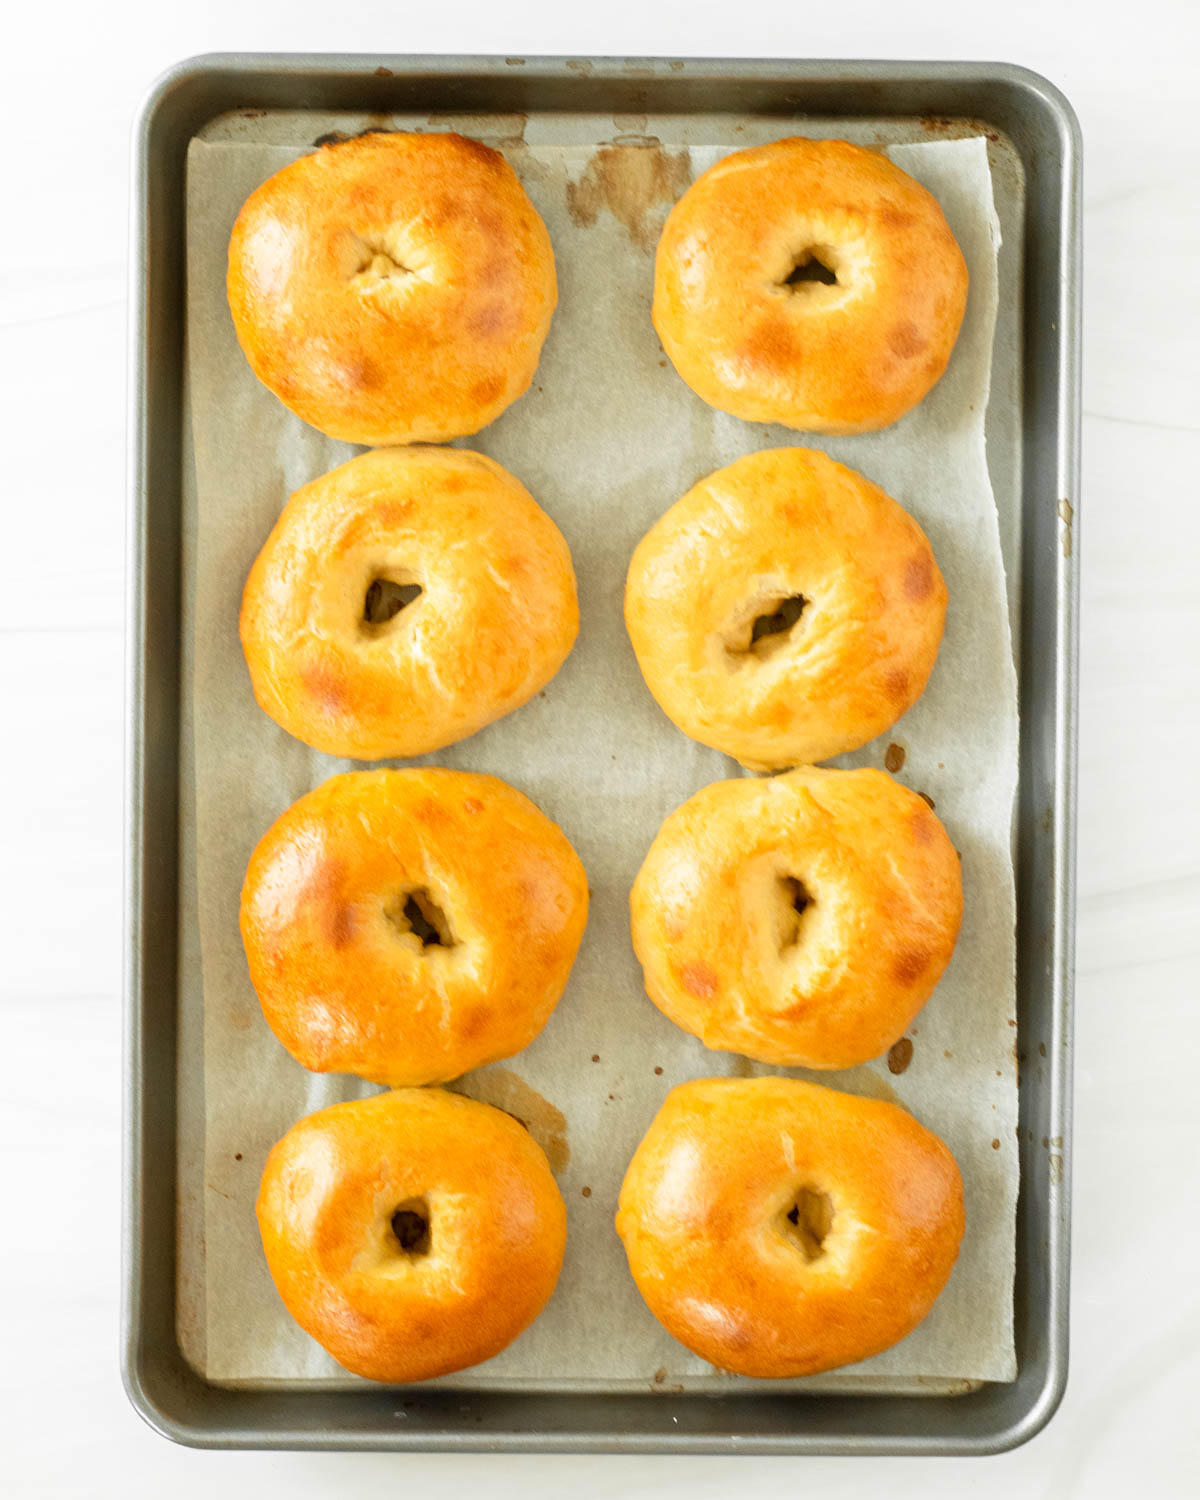 Step 9. Bake the bagels in the oven